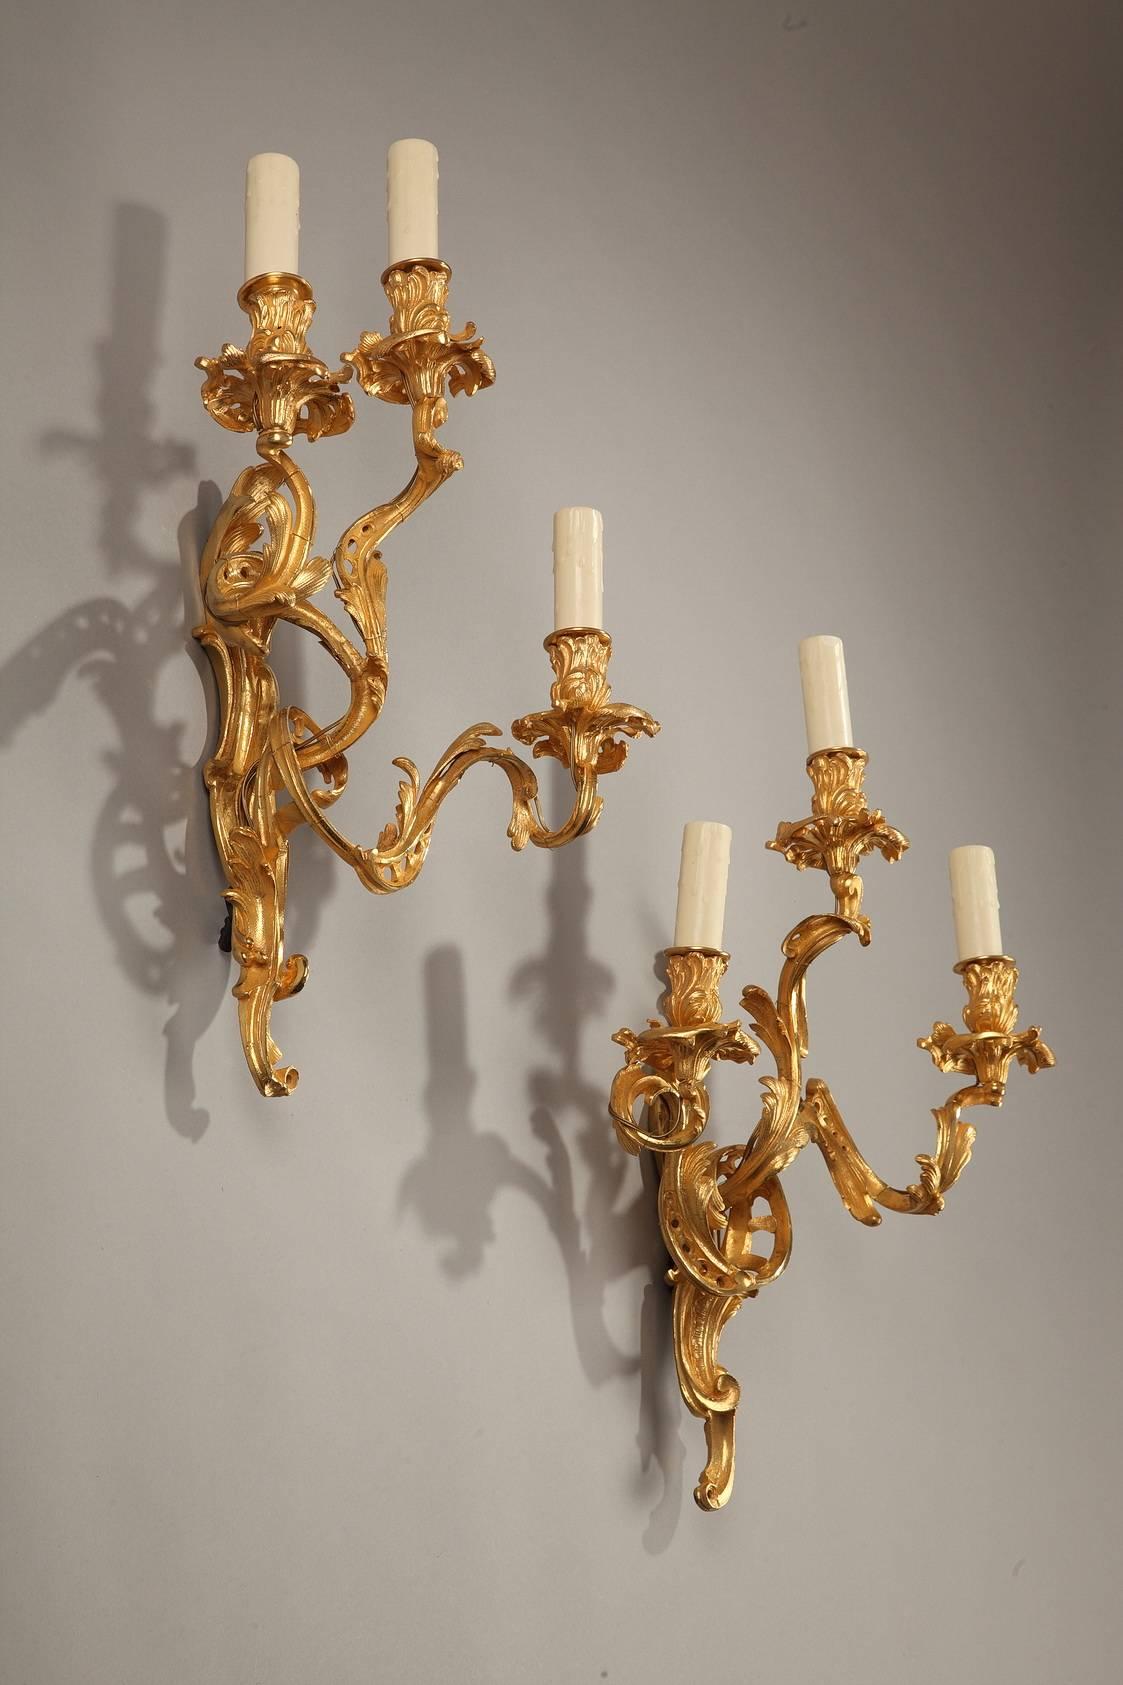 Sizable pair of Louis XV-style bronze sconces. Each sconce features three branches of lights that are sculpted with acanthus leaves, openwork coiling and gadrooned foliage. Electrified.
 
circa 1880.

Dimensions: L: 12.2 in, W: 5.1 in, H: 19.7